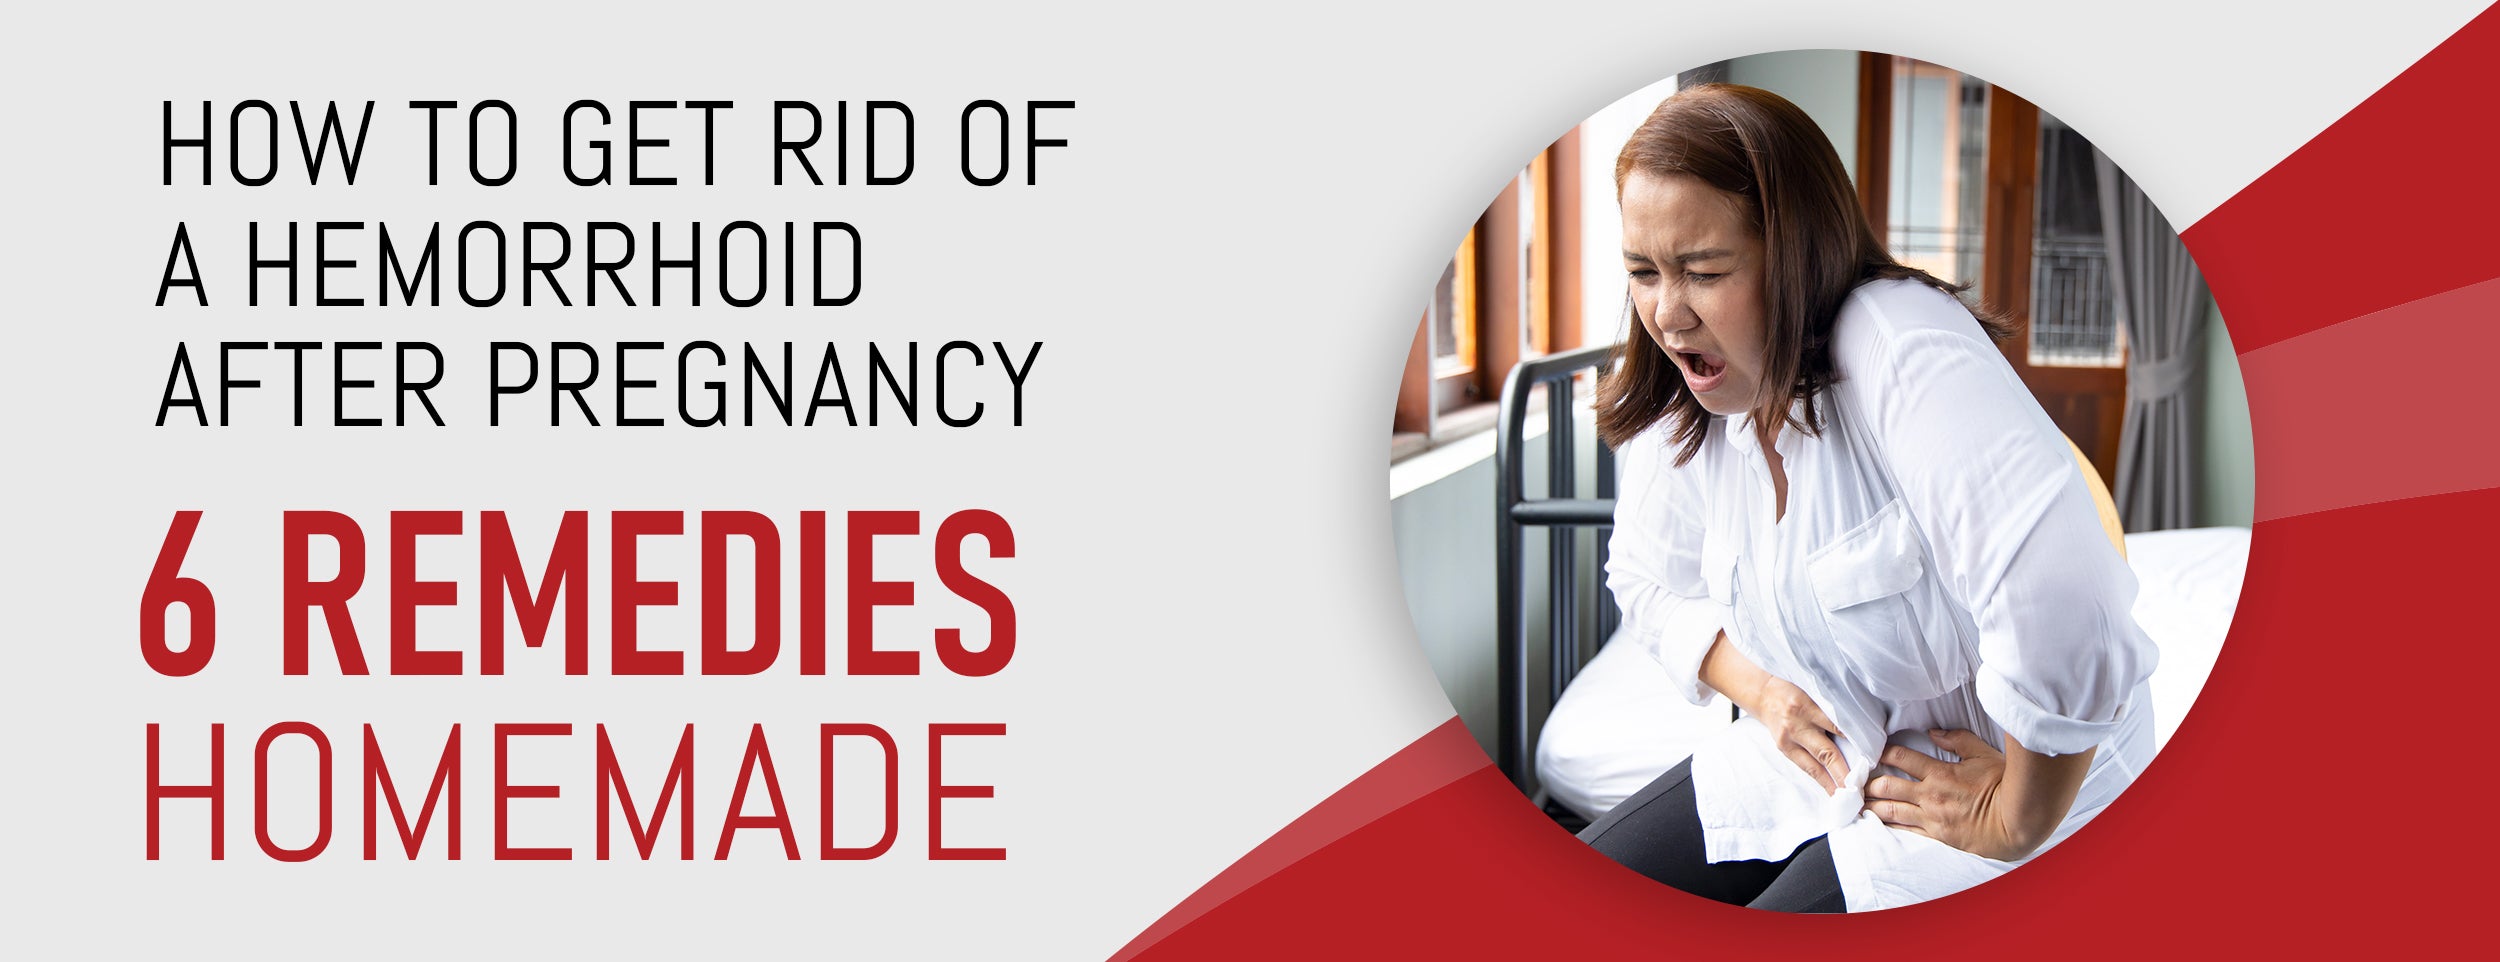 6 Homemade Remedies for Hemorrhoids After Pregnancy